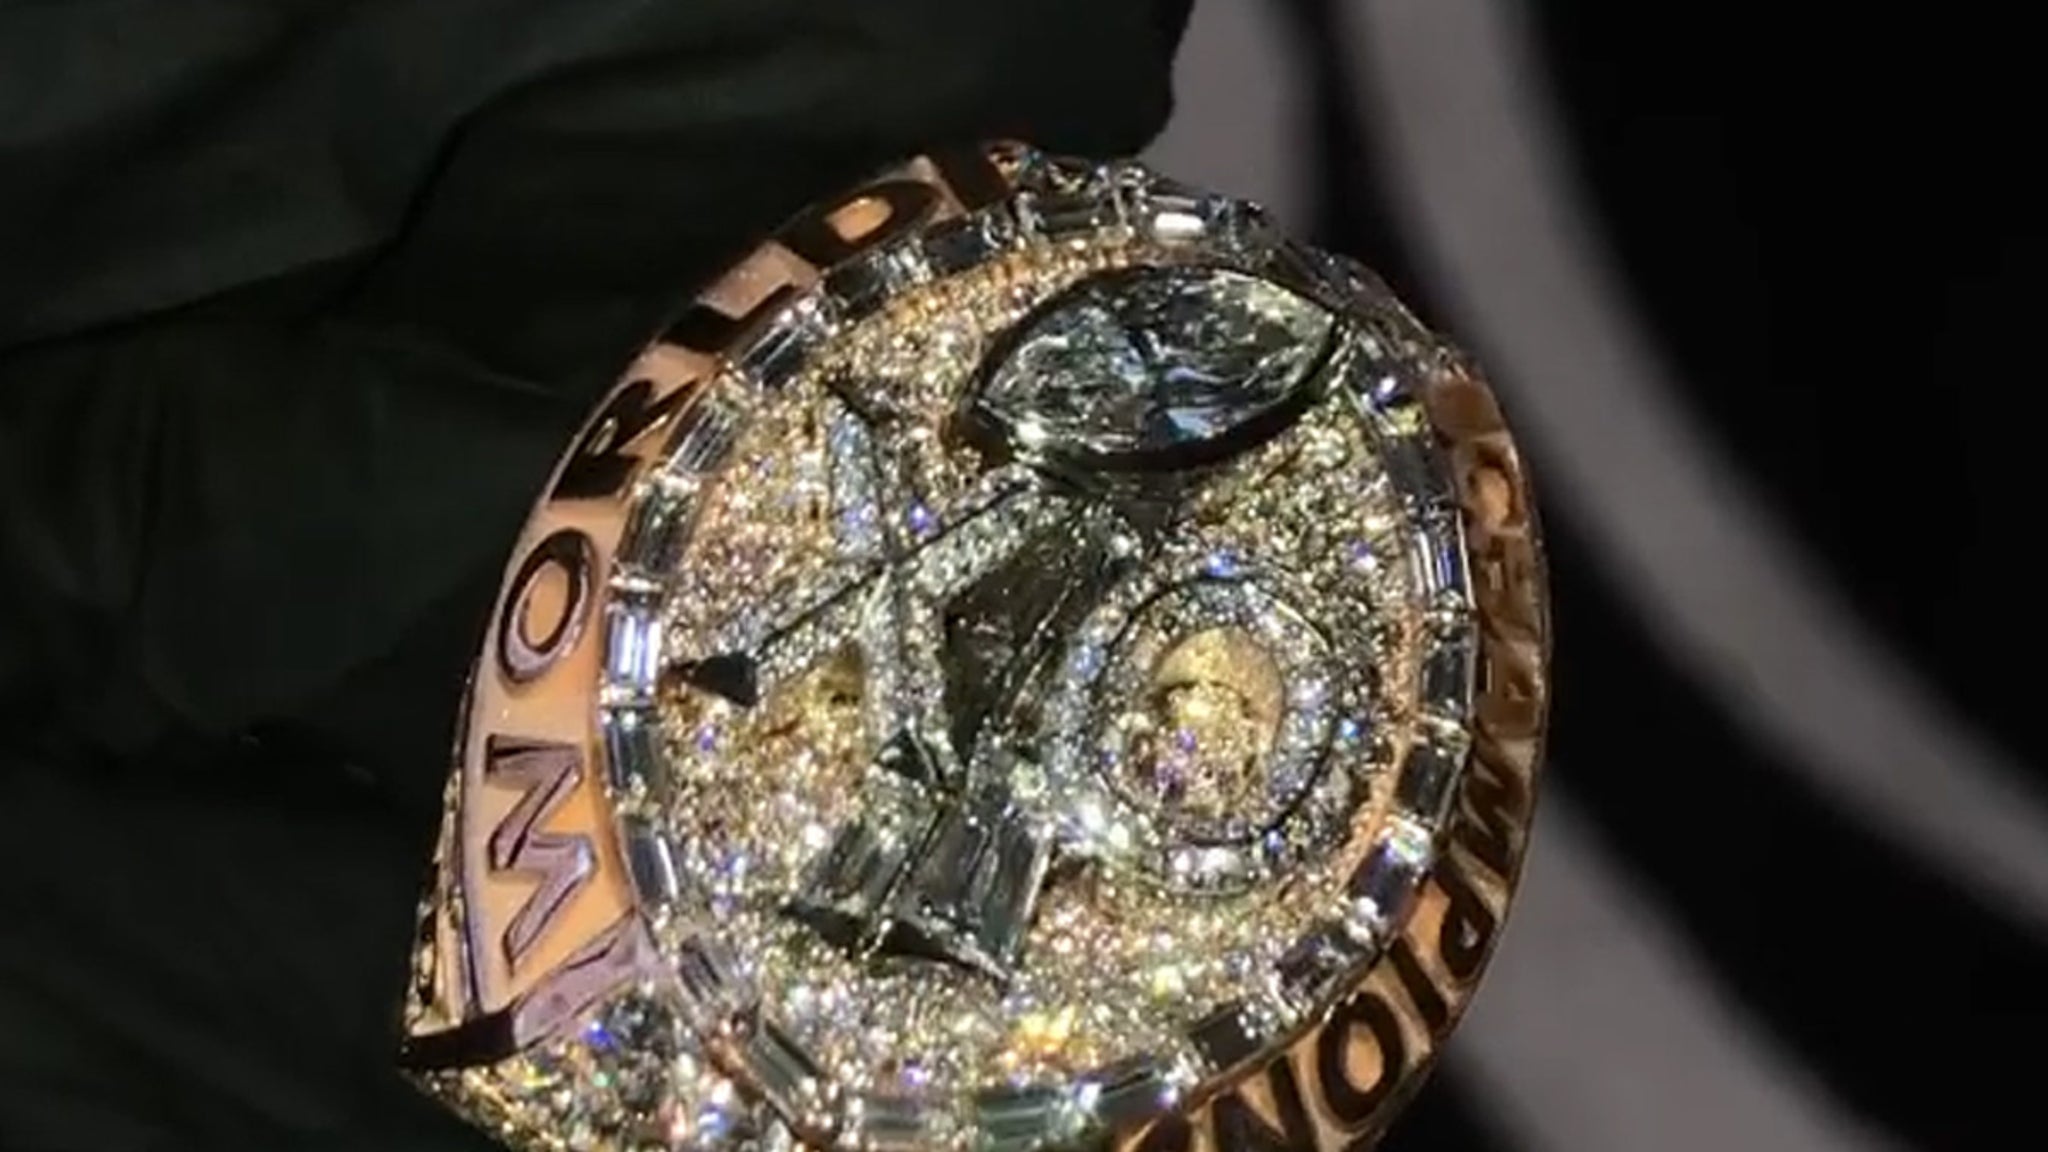 The Weeknd wins a custom Super Bowl diamond ring after an incredible show at halftime